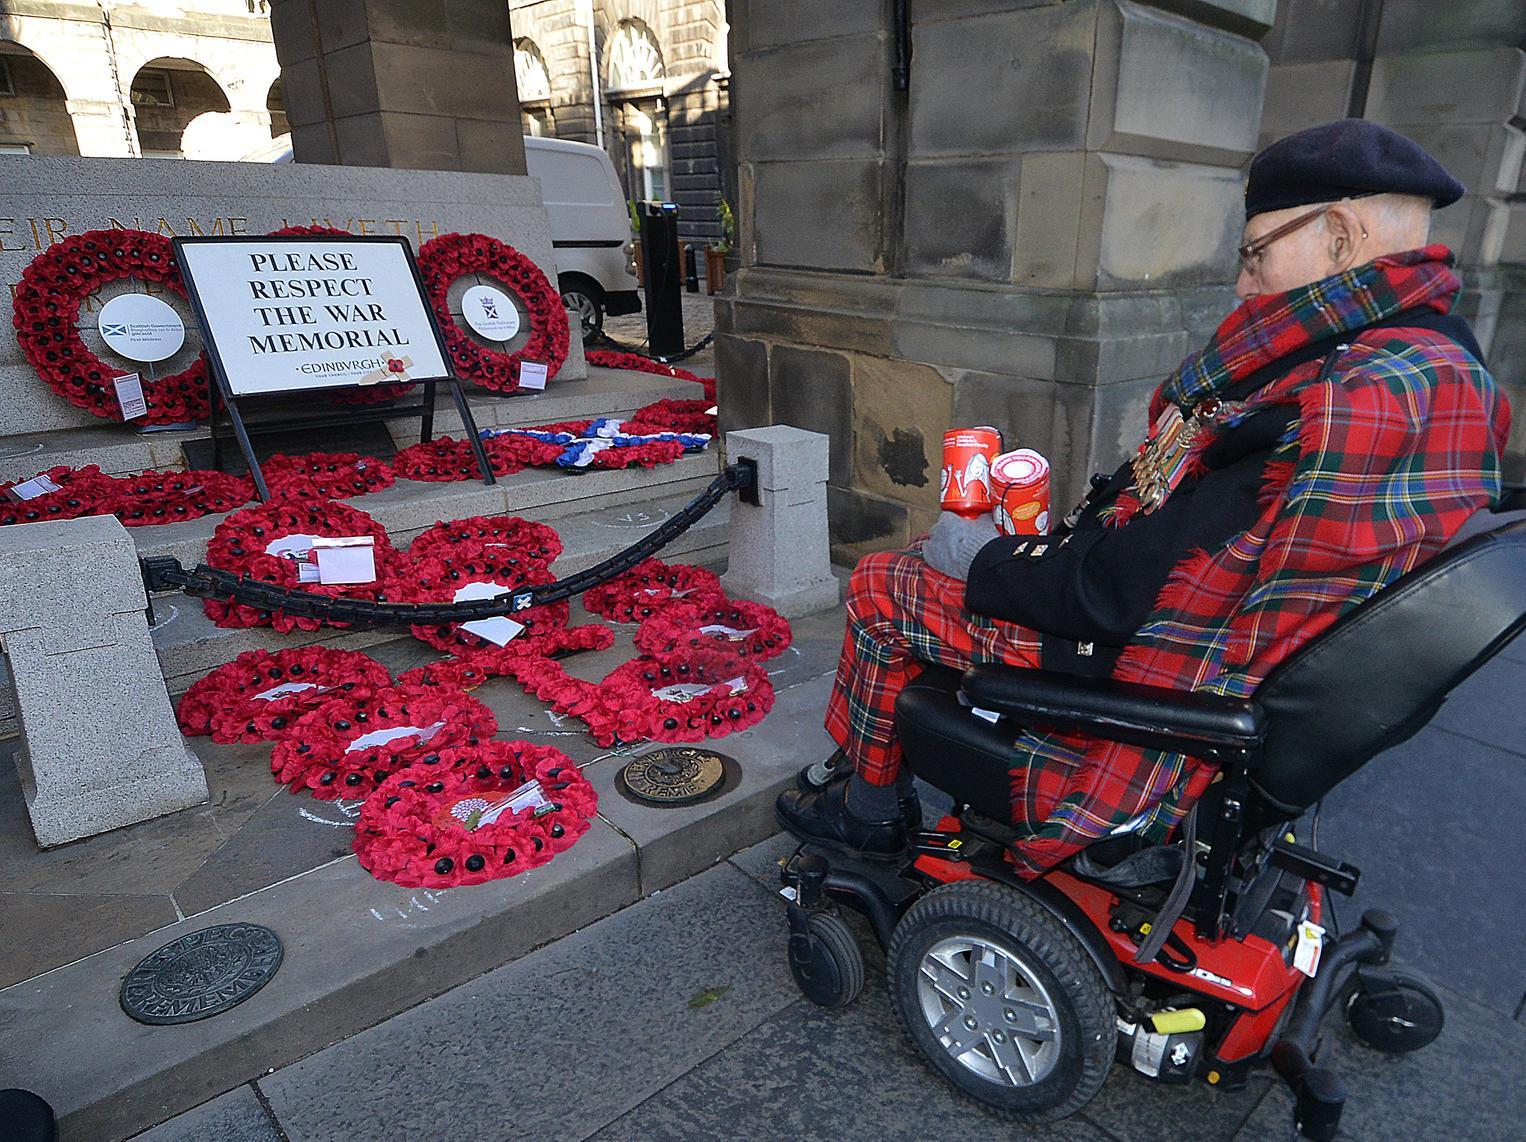 Tom paying his respects at the Edinburgh City Chambers war memorial